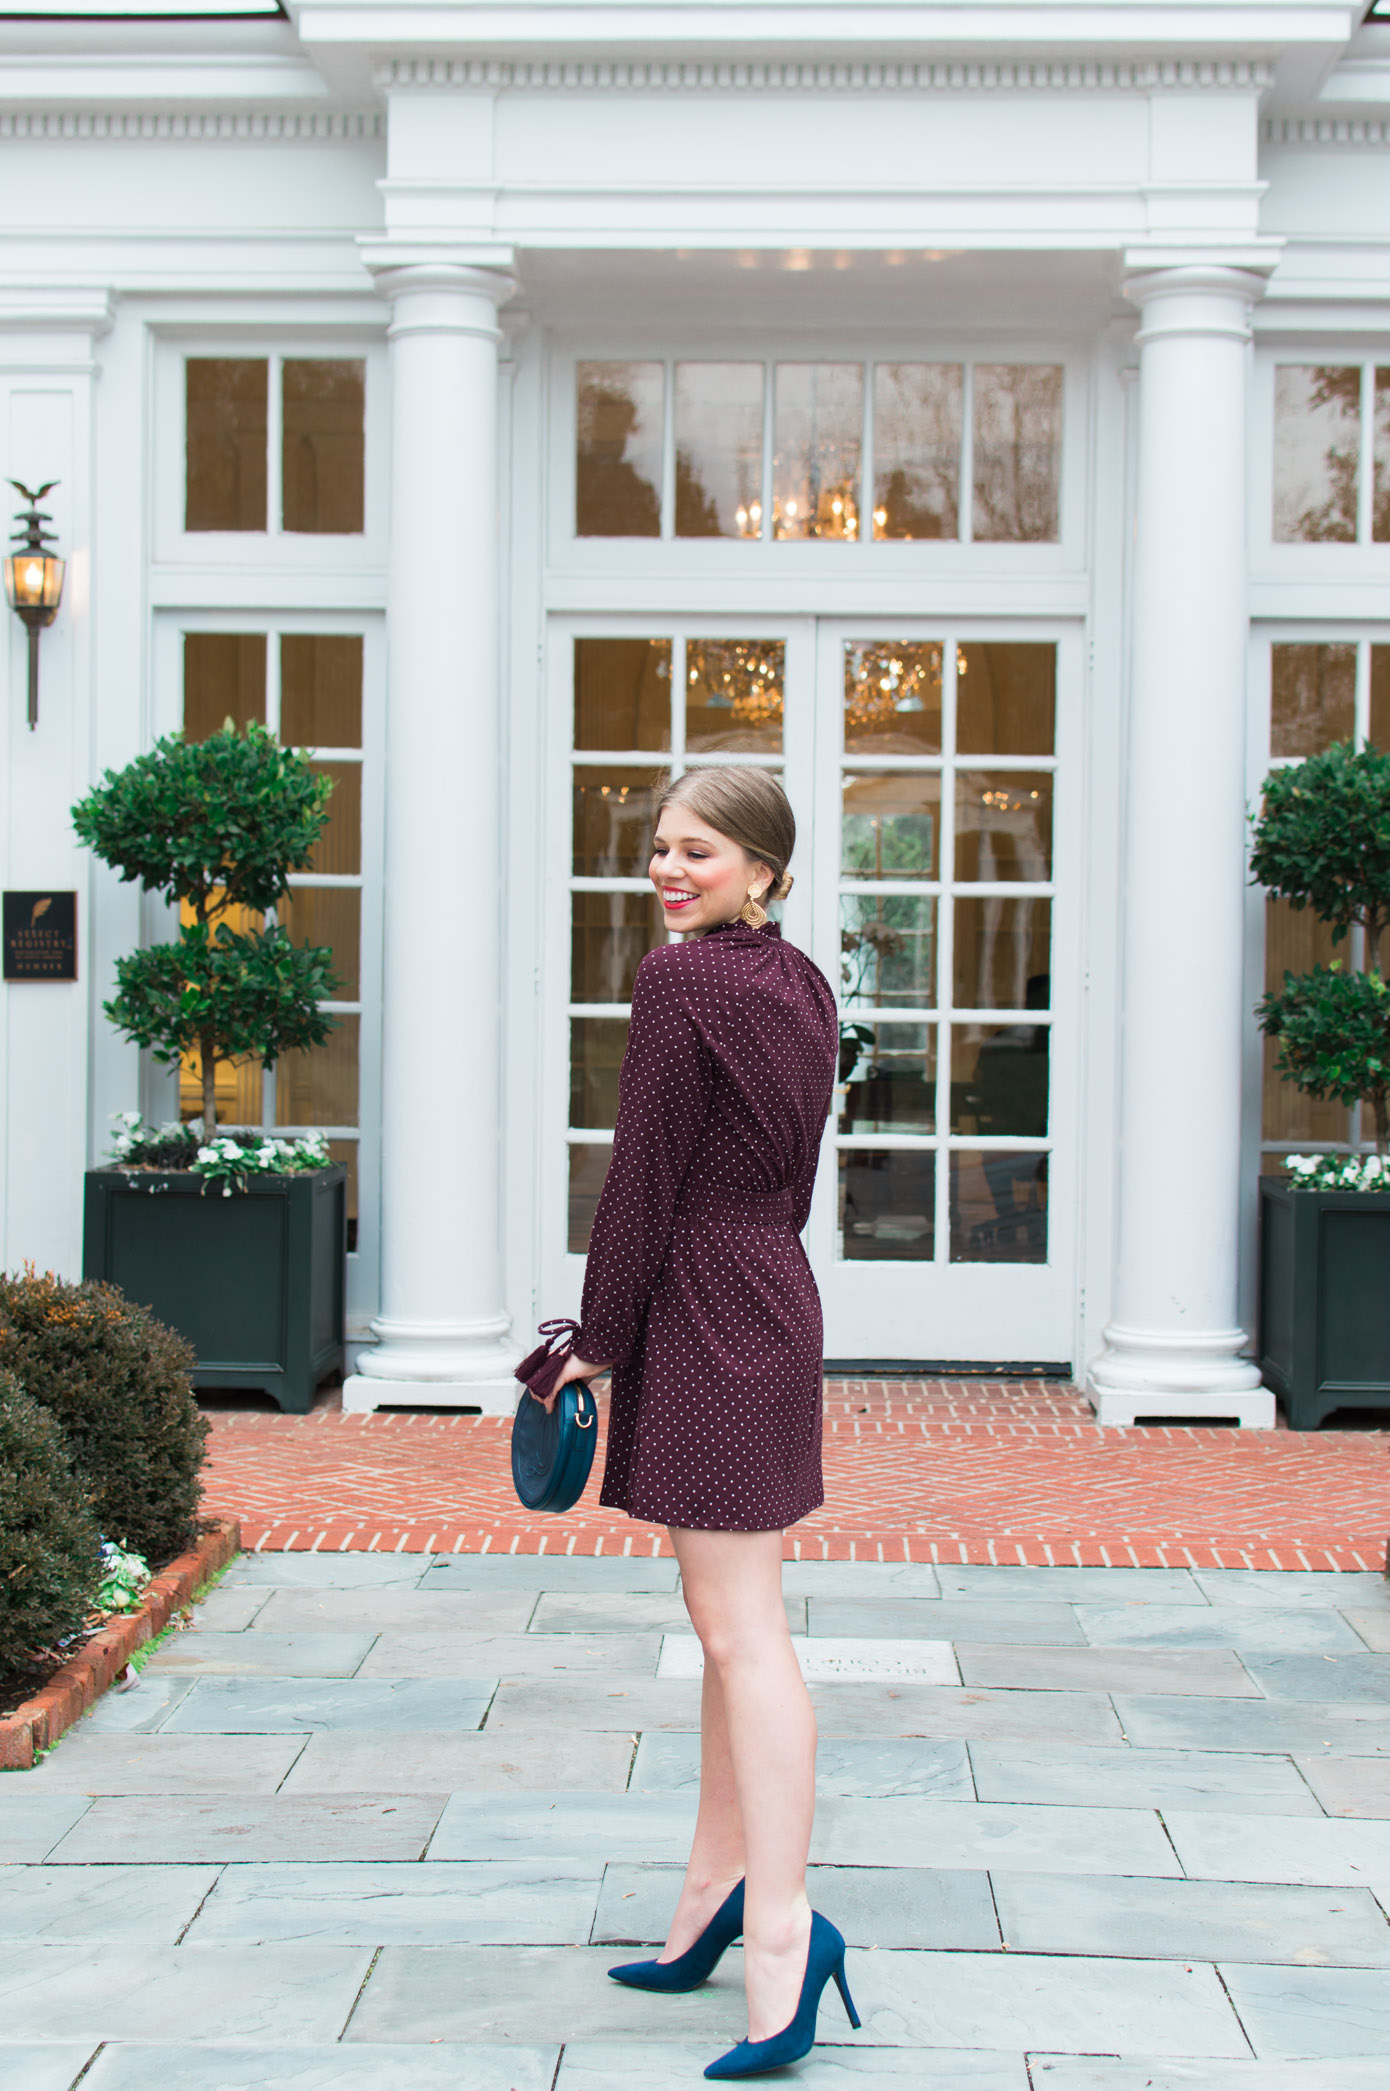 Valentine's Day Dresses | Chic Winter Date Night Look | Louella Reese Life & Style Blog 